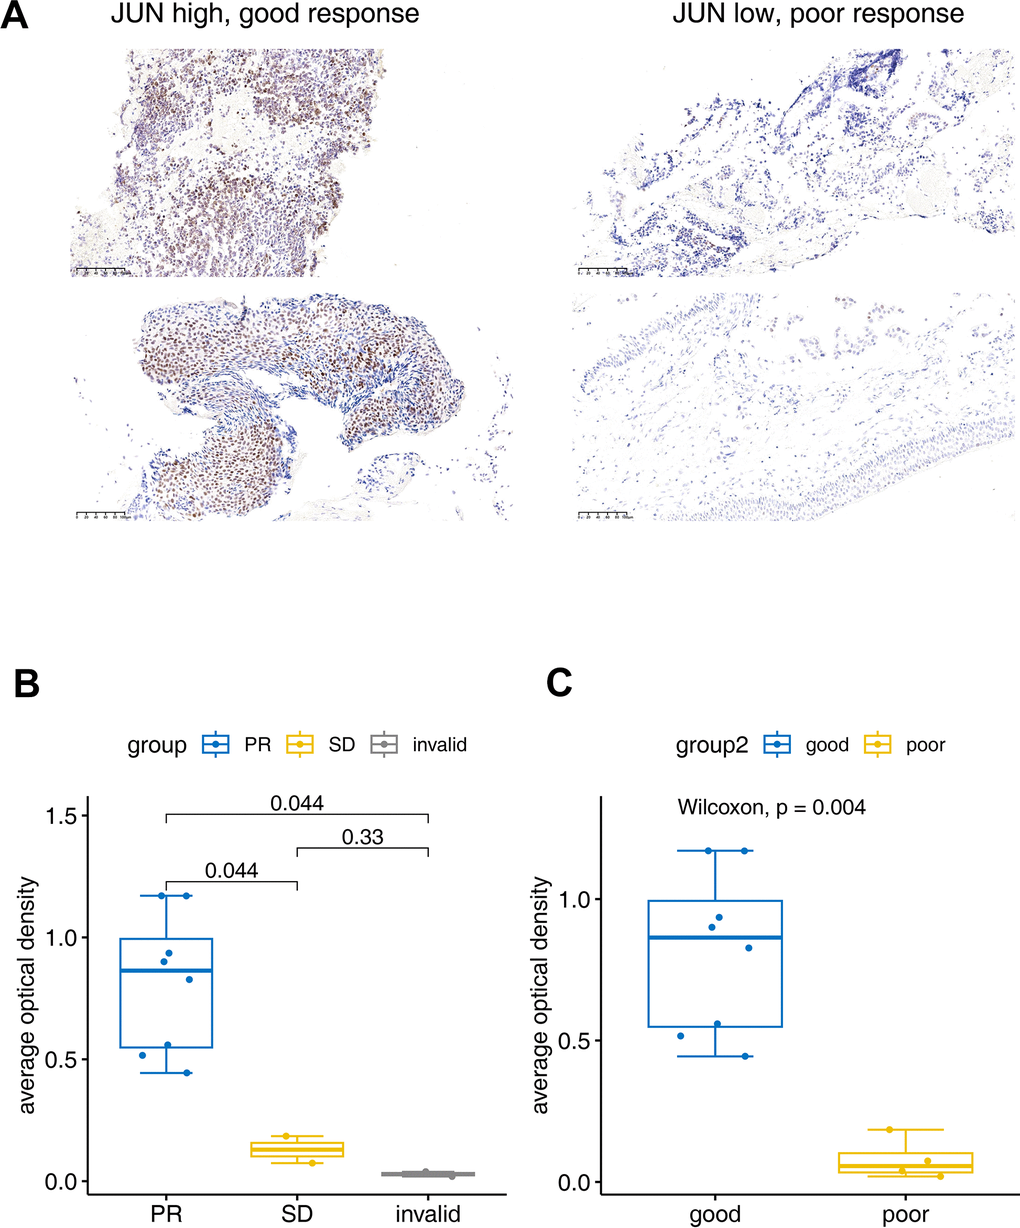 Immunohistochemical verification of JUN expression. (A) The JUN expression in good and poor response patients for PD1 treatment. (B, C) Bar plot for the average optical density of immunohistochemical imaging. PR: Partial response (sample number=8), SD: Stable disease (sample number=2), invalid (sample number=2). Good: (sample number=8), poor: (sample number=4). The test was performed with non-parametric Wilcoxon test.